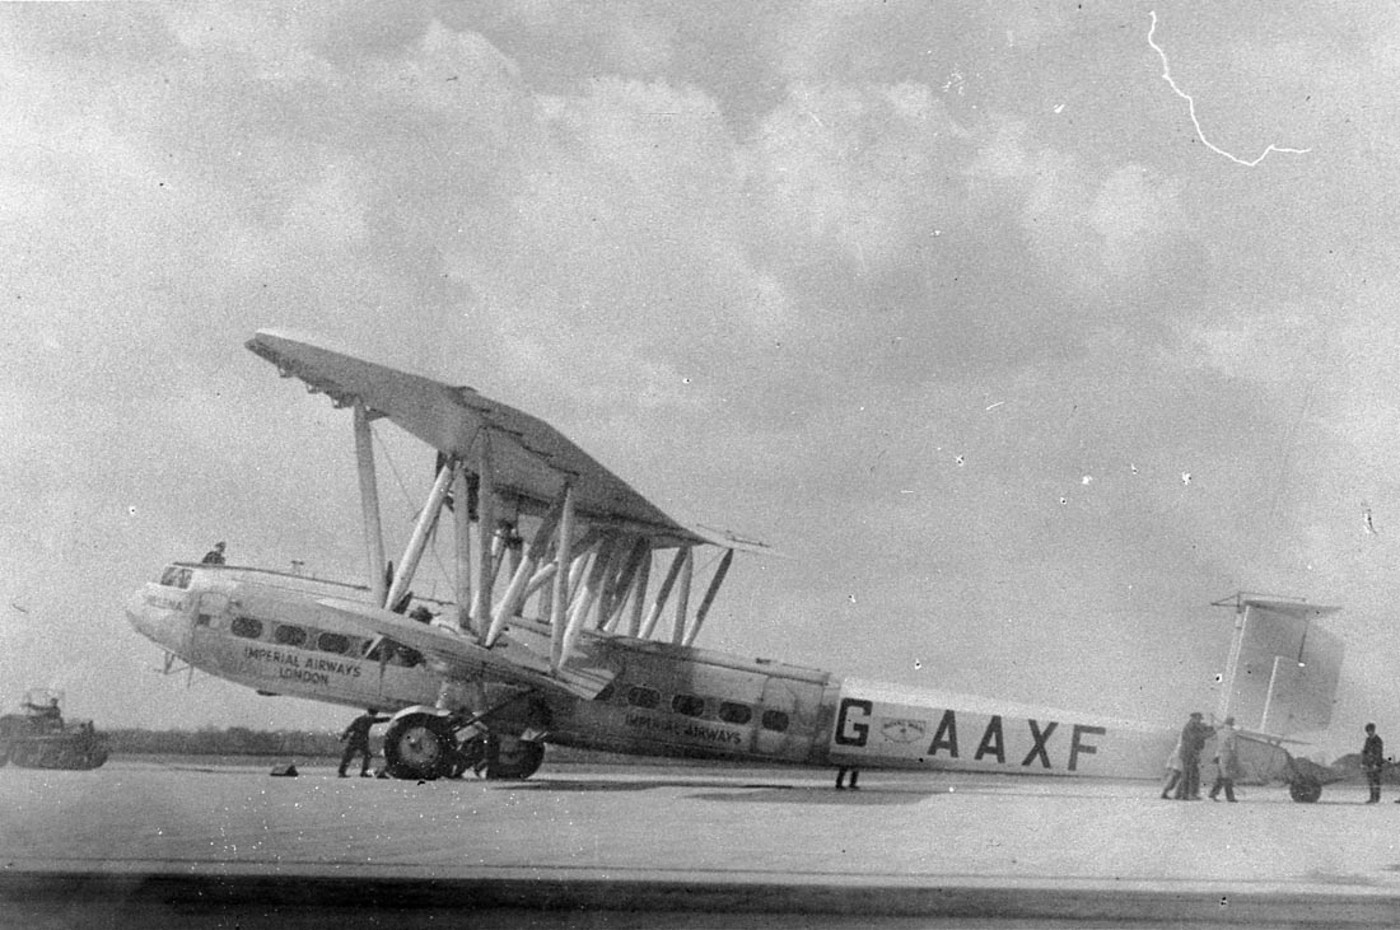 Imperial Airways' Handley Page H.P. 45, G-AAXF, Helena, being moved by a ground crew. (State Library of New South Wales)